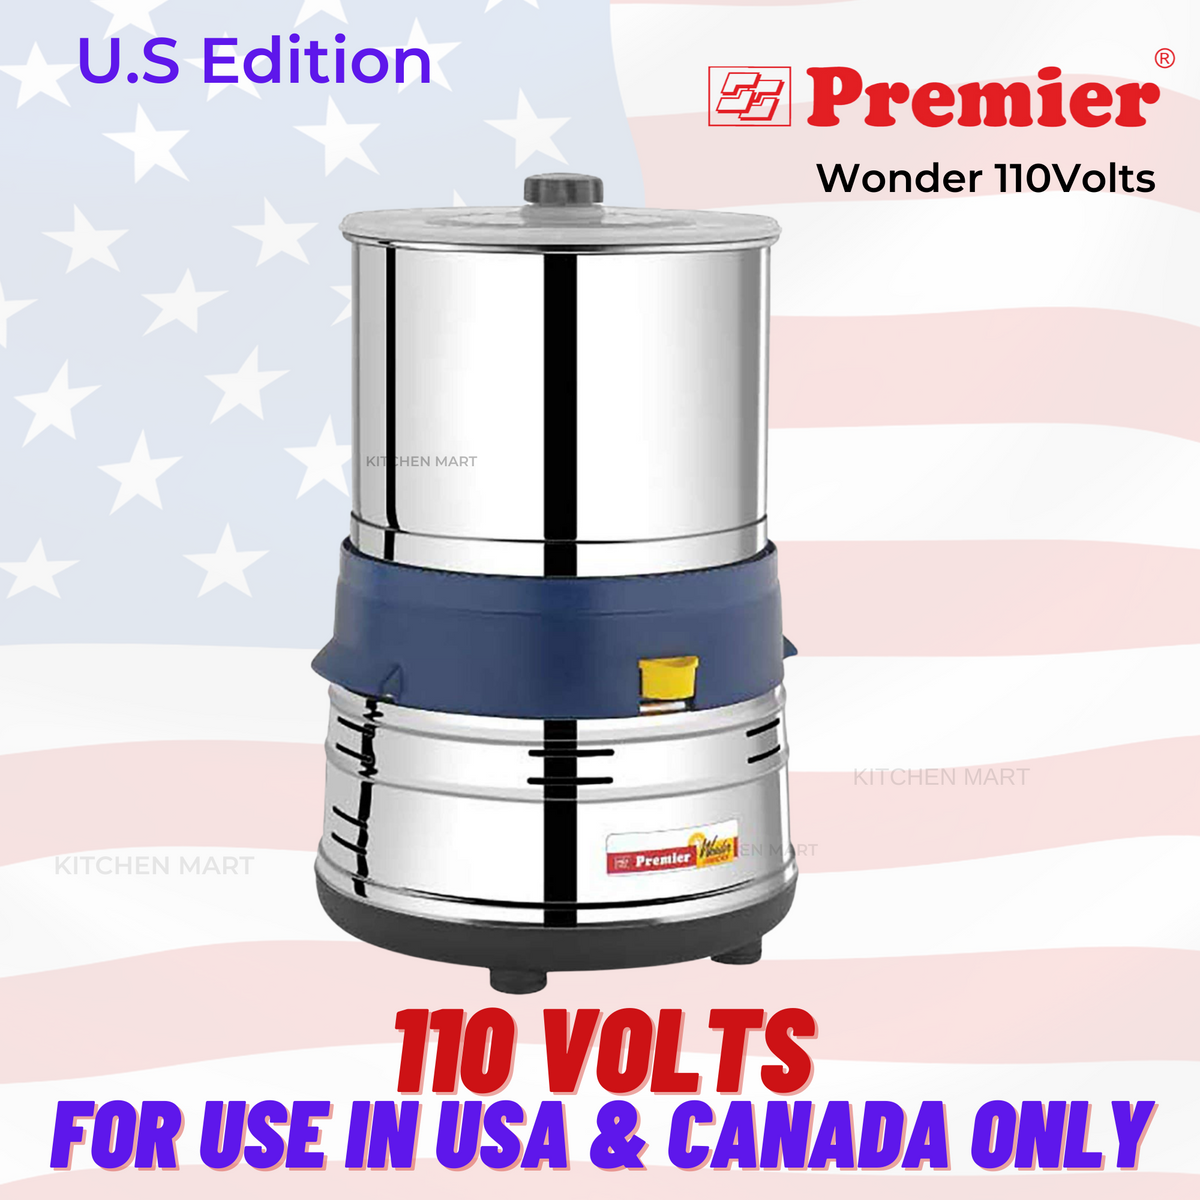 PREMIER Wonder Table Top Wet Grinder, 110 volts for use in USA &amp; Canada only